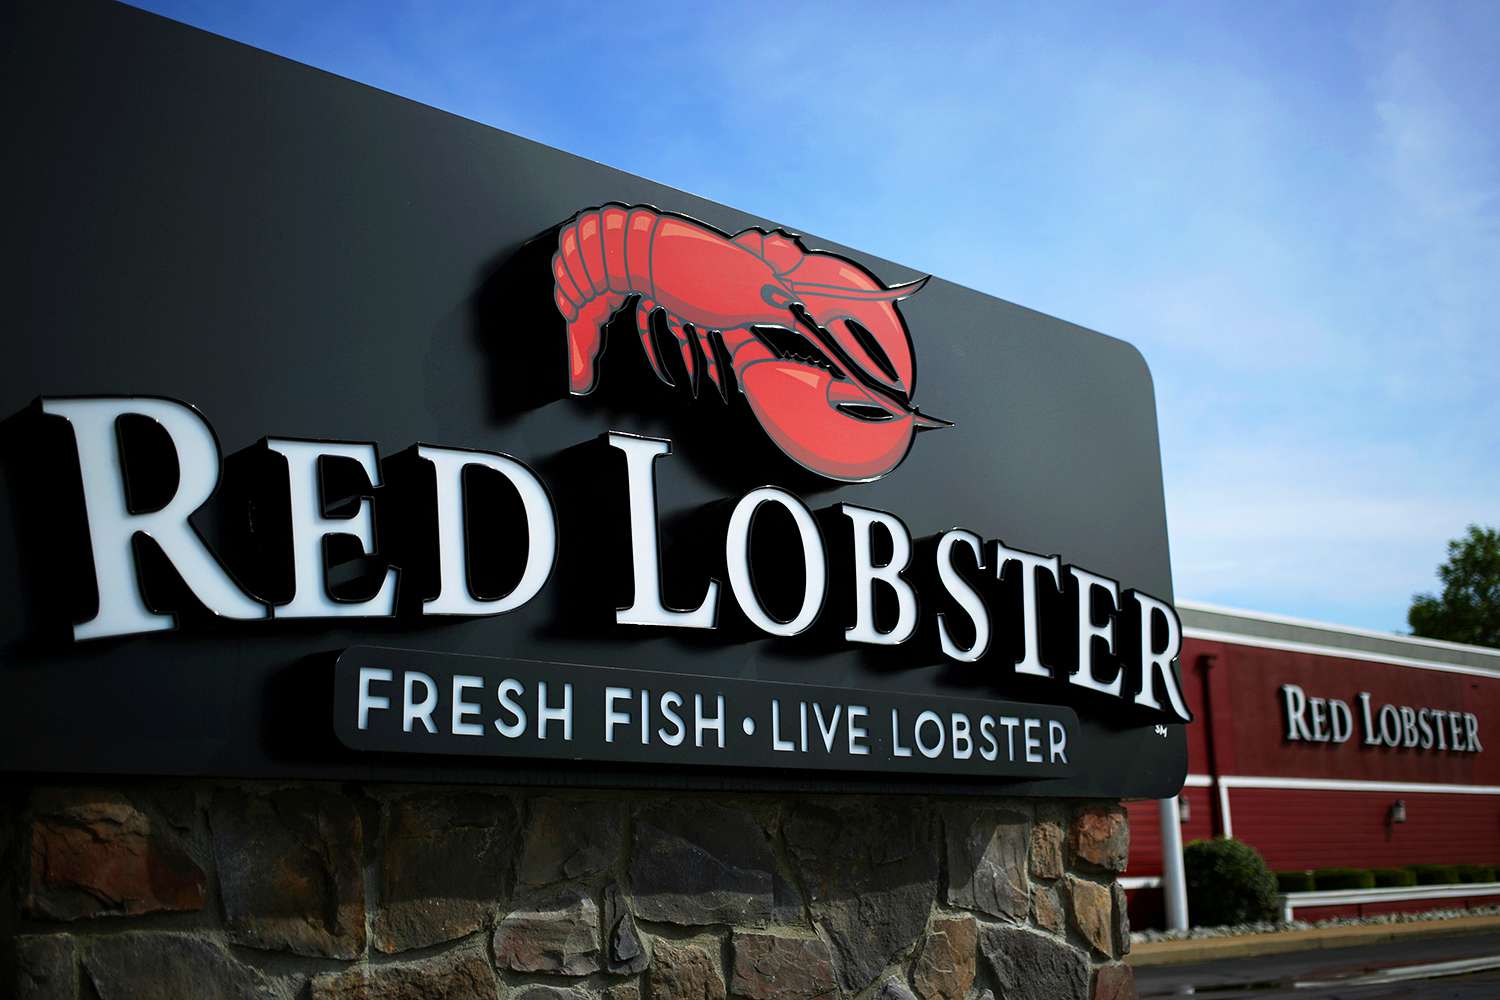 Major Restaurant Chain Red Lobster Makes One Last Desperate Attempt To Stay out of Bankruptcy